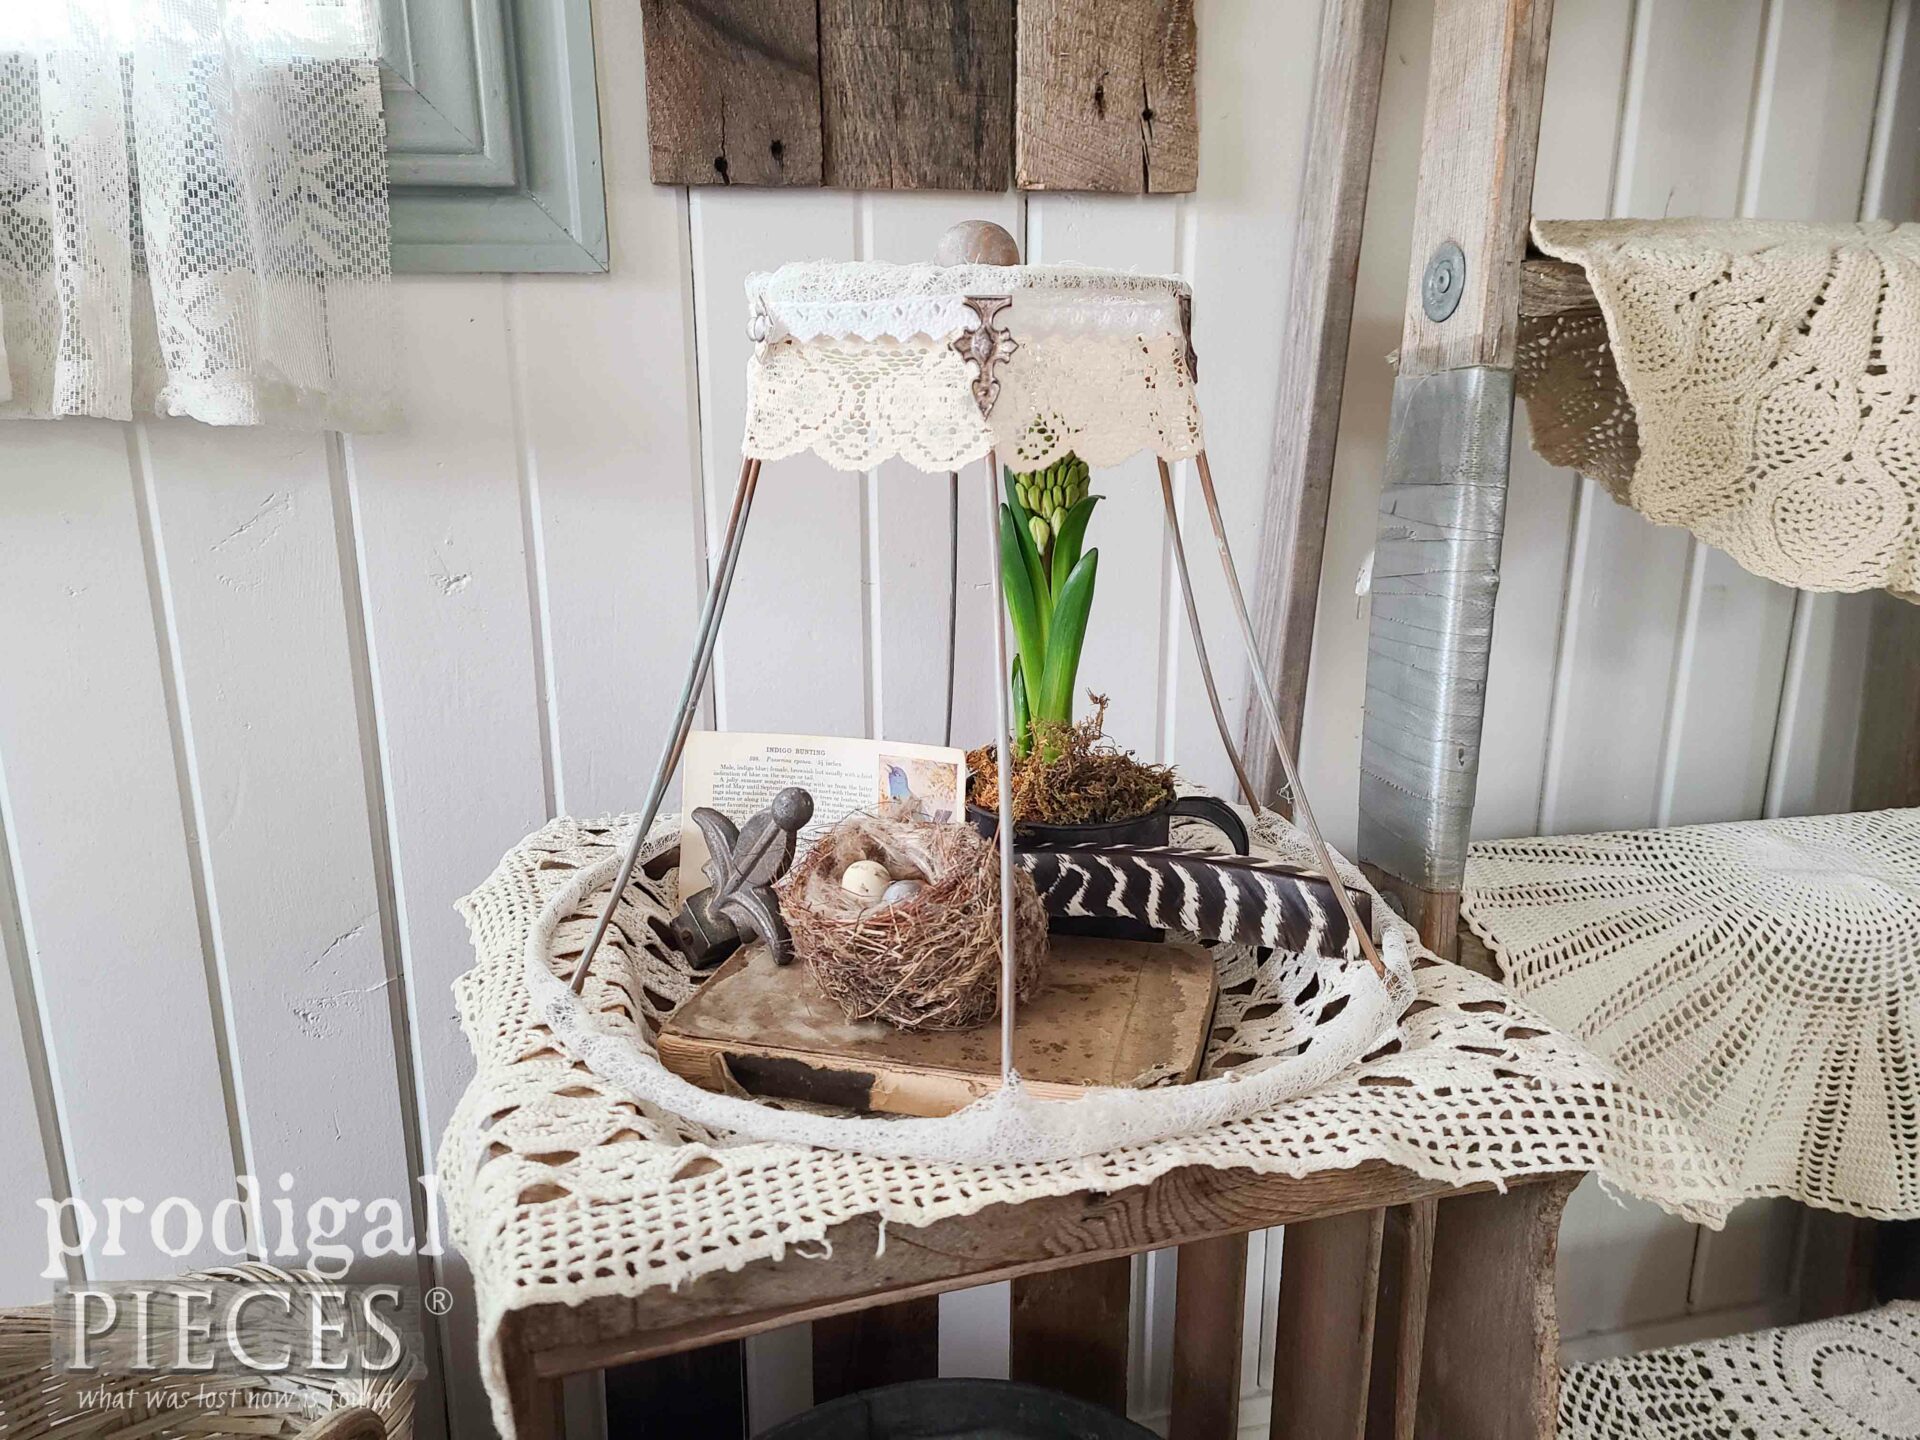 DIY Upcycled Lampshade Cloche for Farmhouse Style by Larissa of Prodigal Pieces | prodigalpieces.com #prodigalpieces #farmhouse #diy #upcycled #repurposed